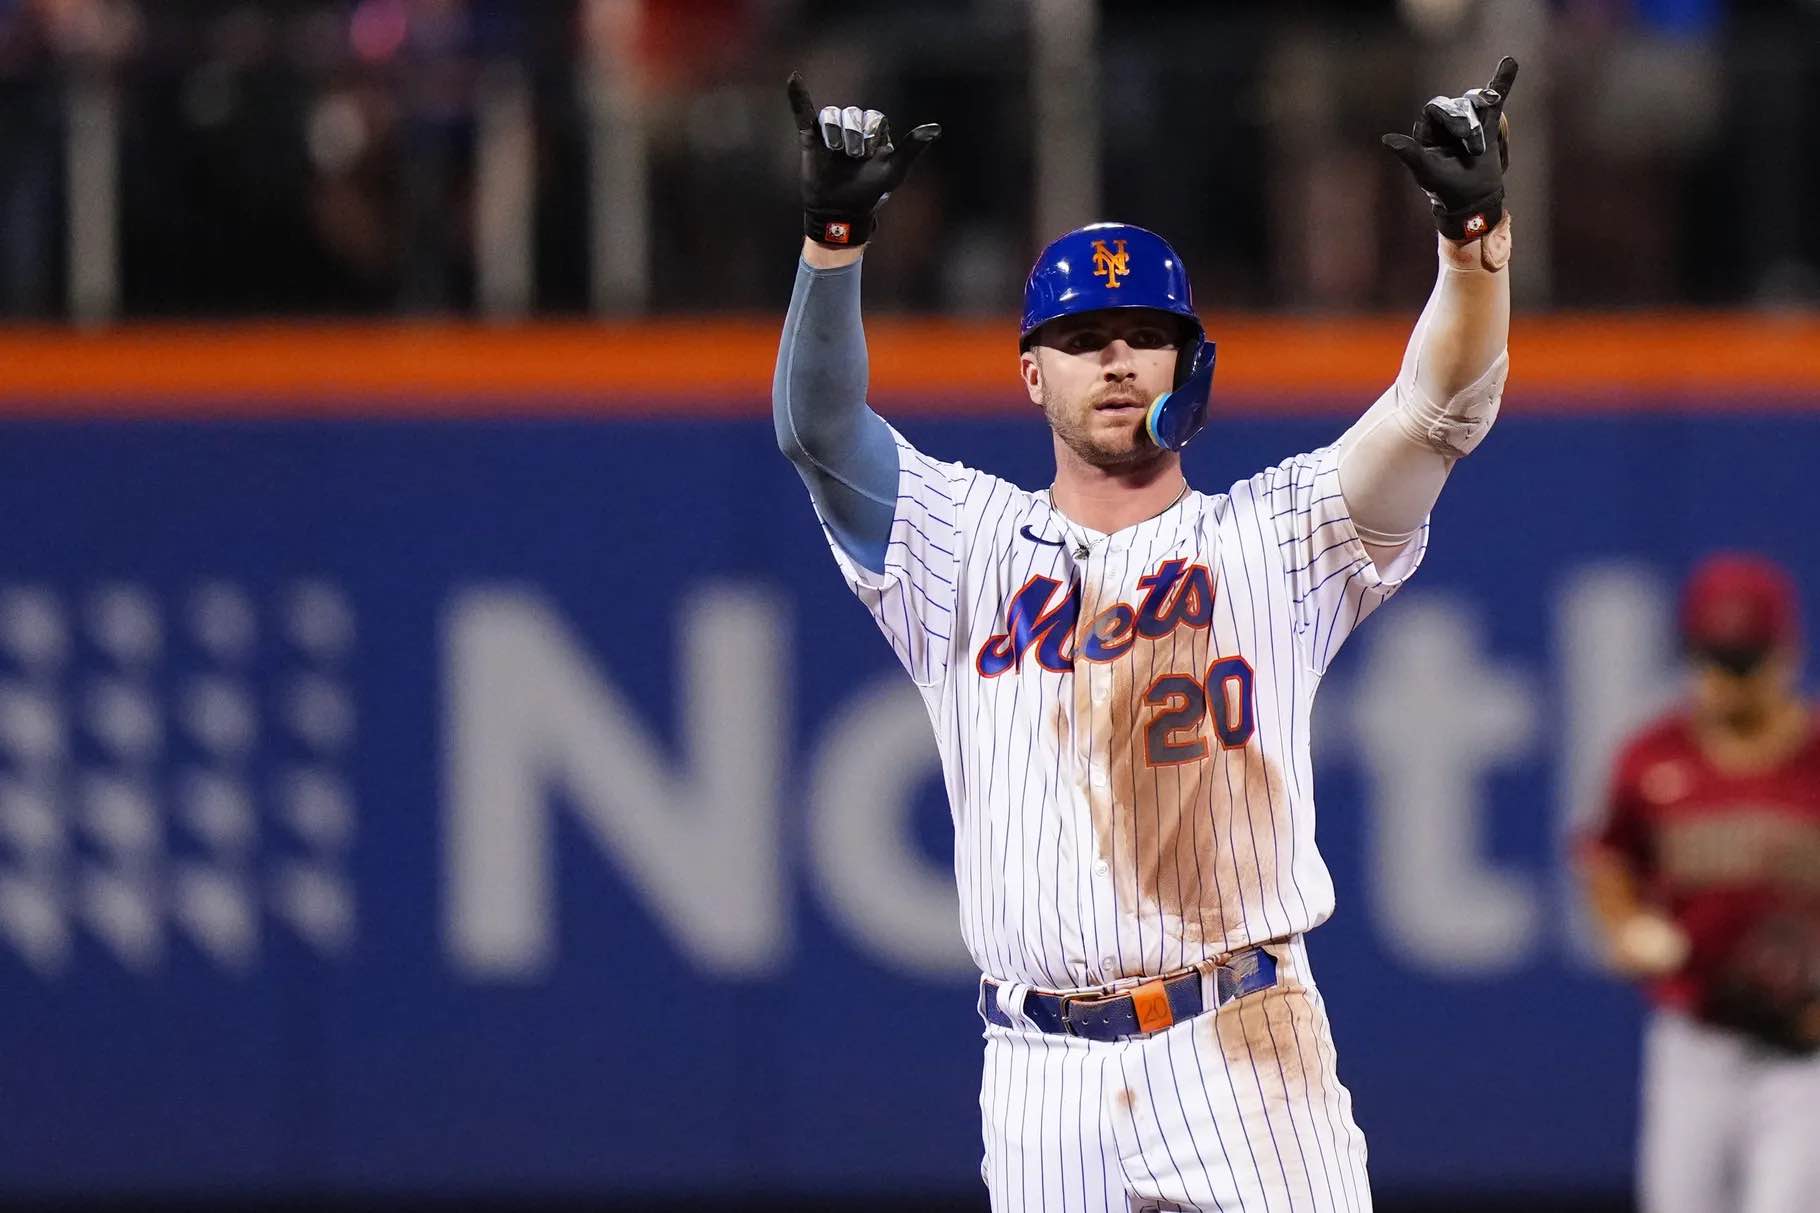 Pete Alonso, New York Mets